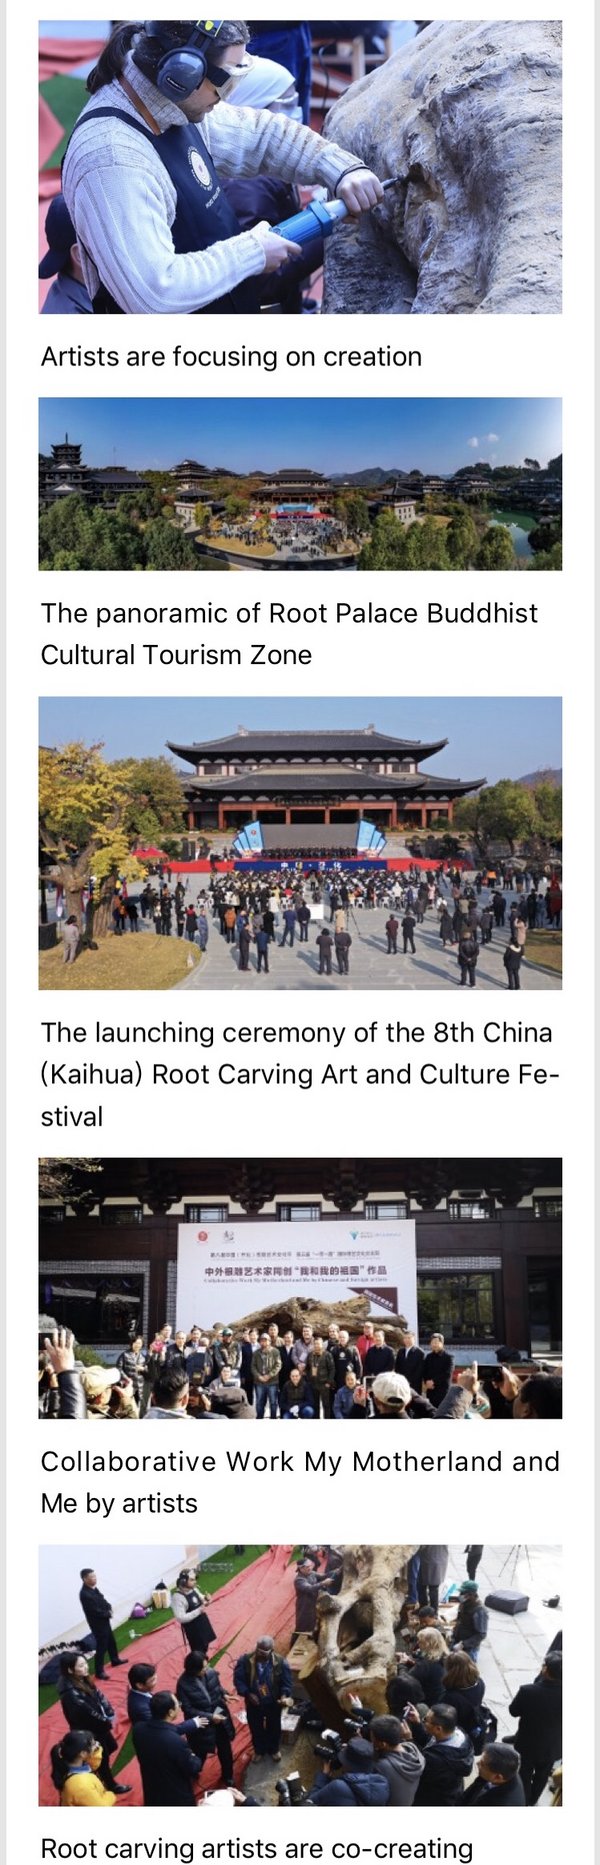 The 8th China (Kaihua) Root Carving Art and Culture Festival and the 3rd 